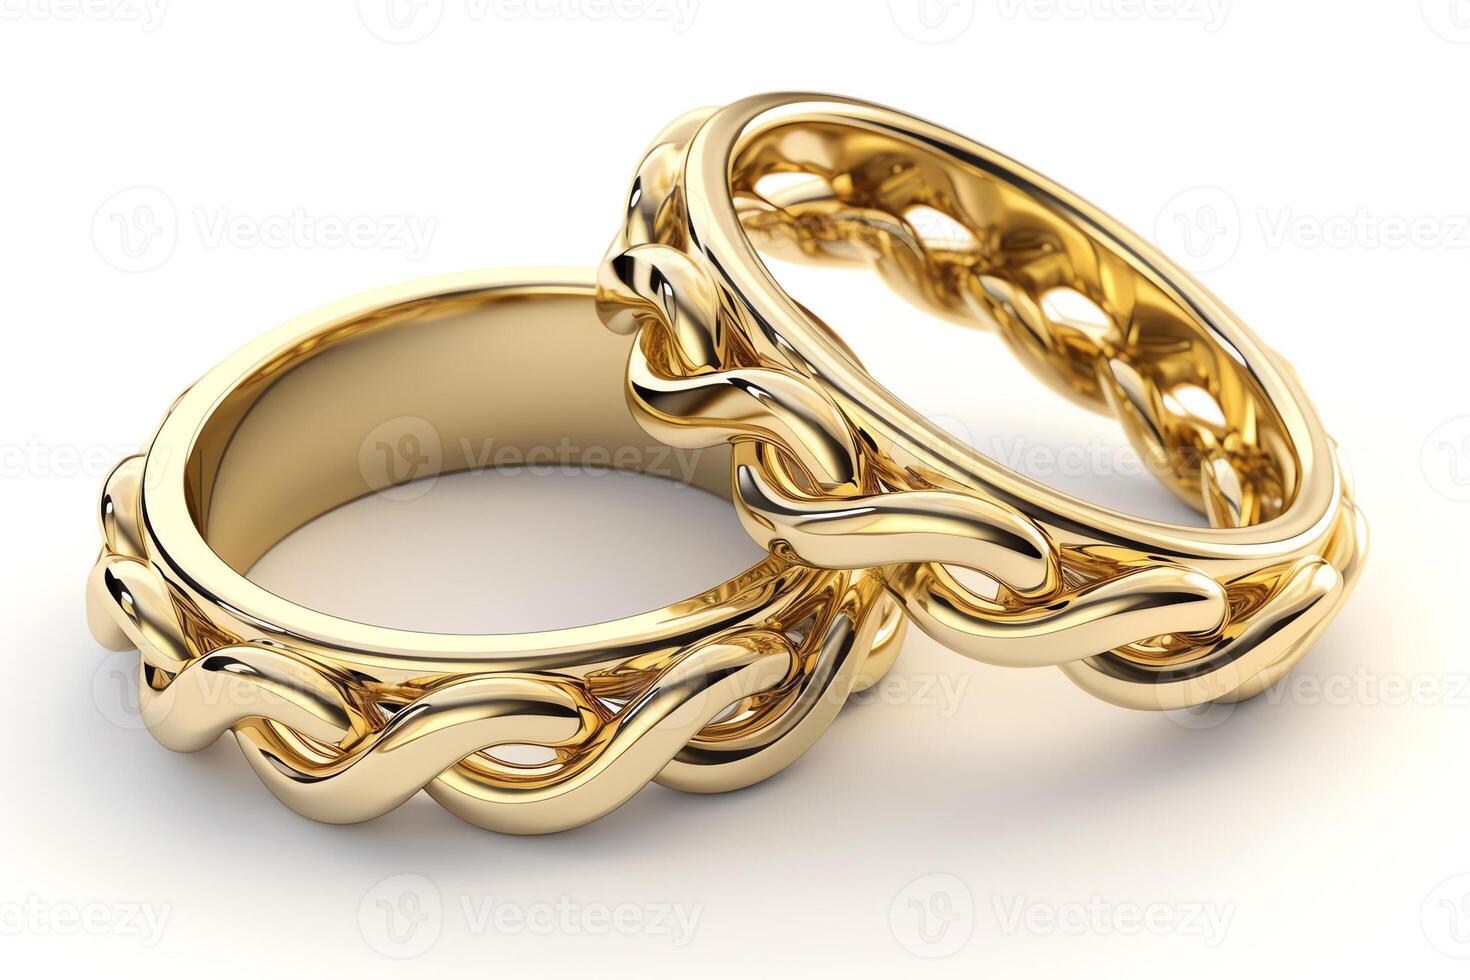 2 Gold Wedding Rings Linked Like Chains In 3d Rendering On A White Background photo